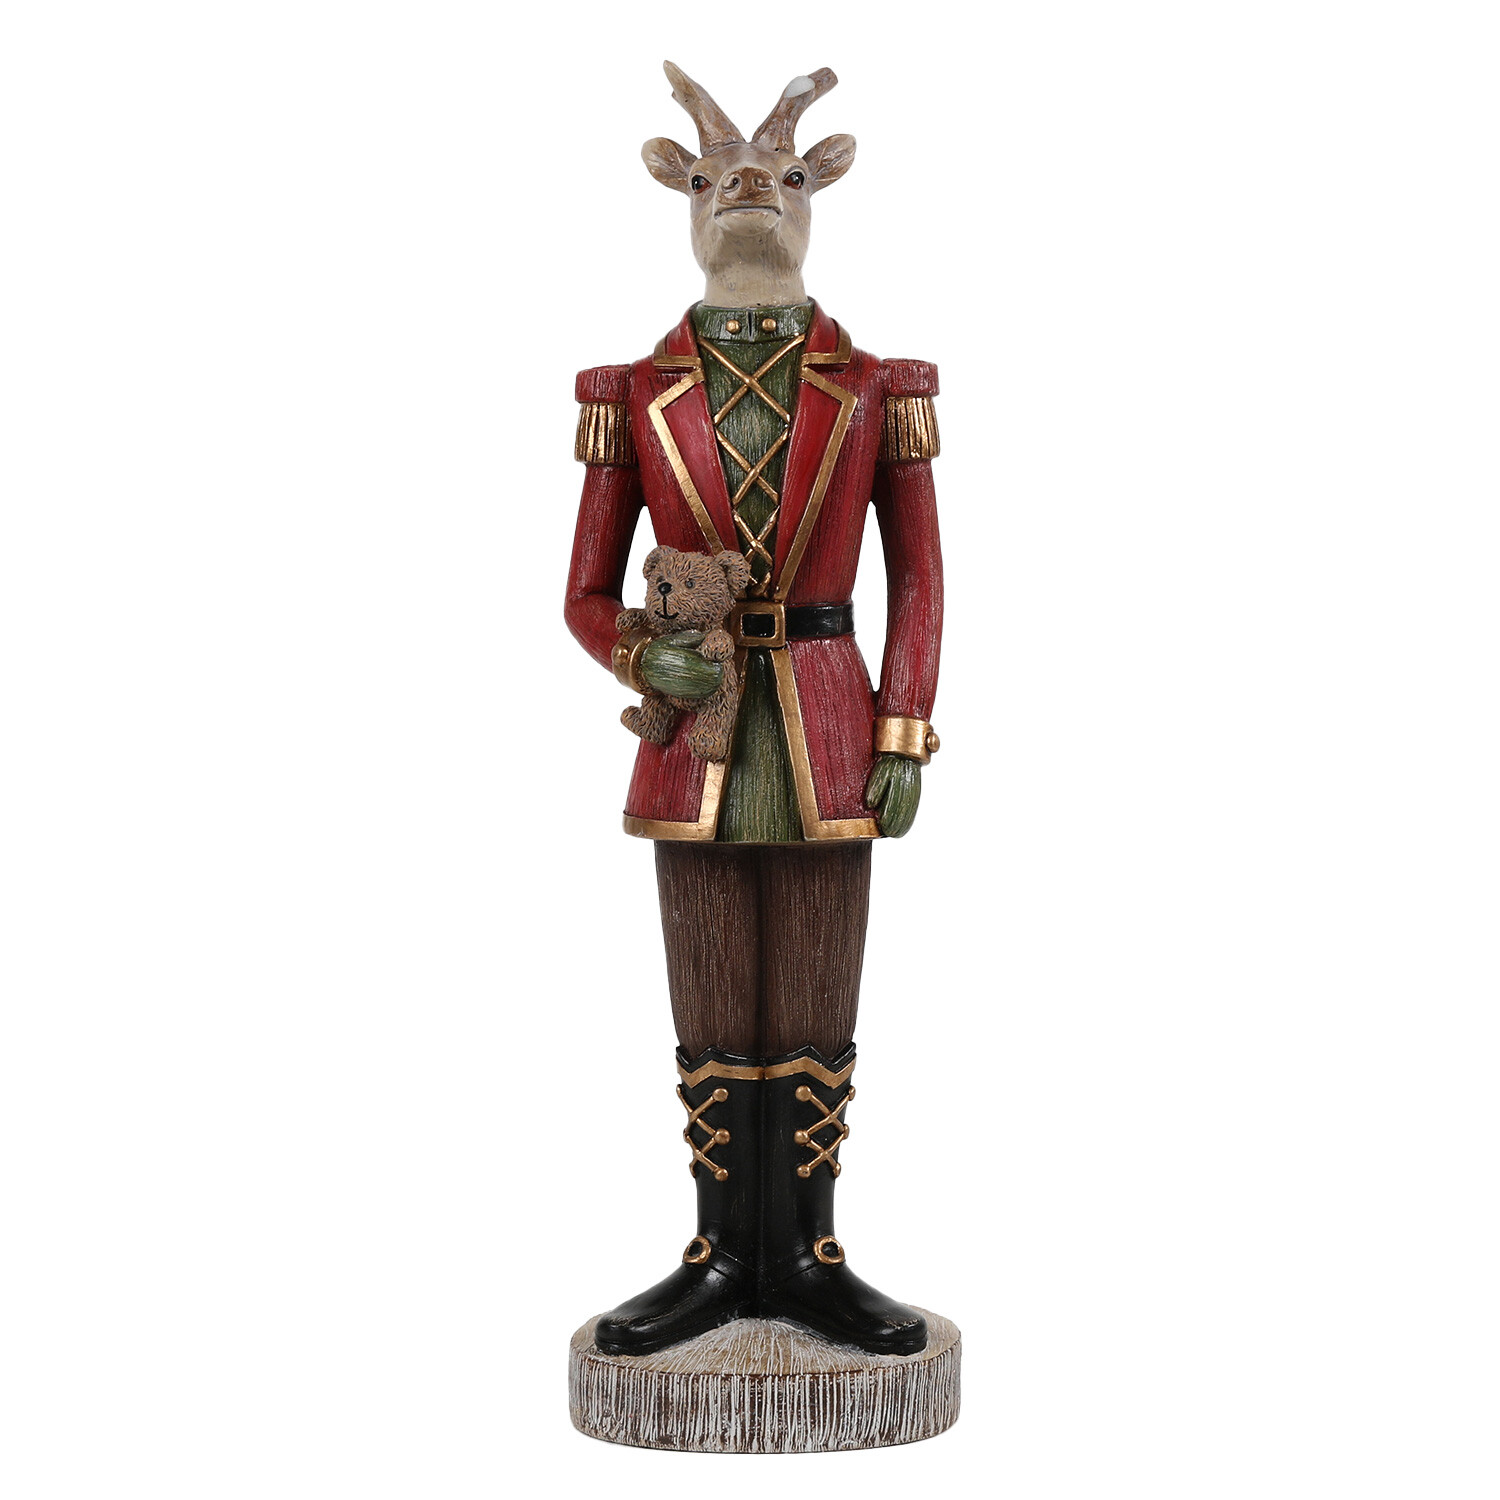 Stag Nutcracker Standing Ornament - Red Image 1